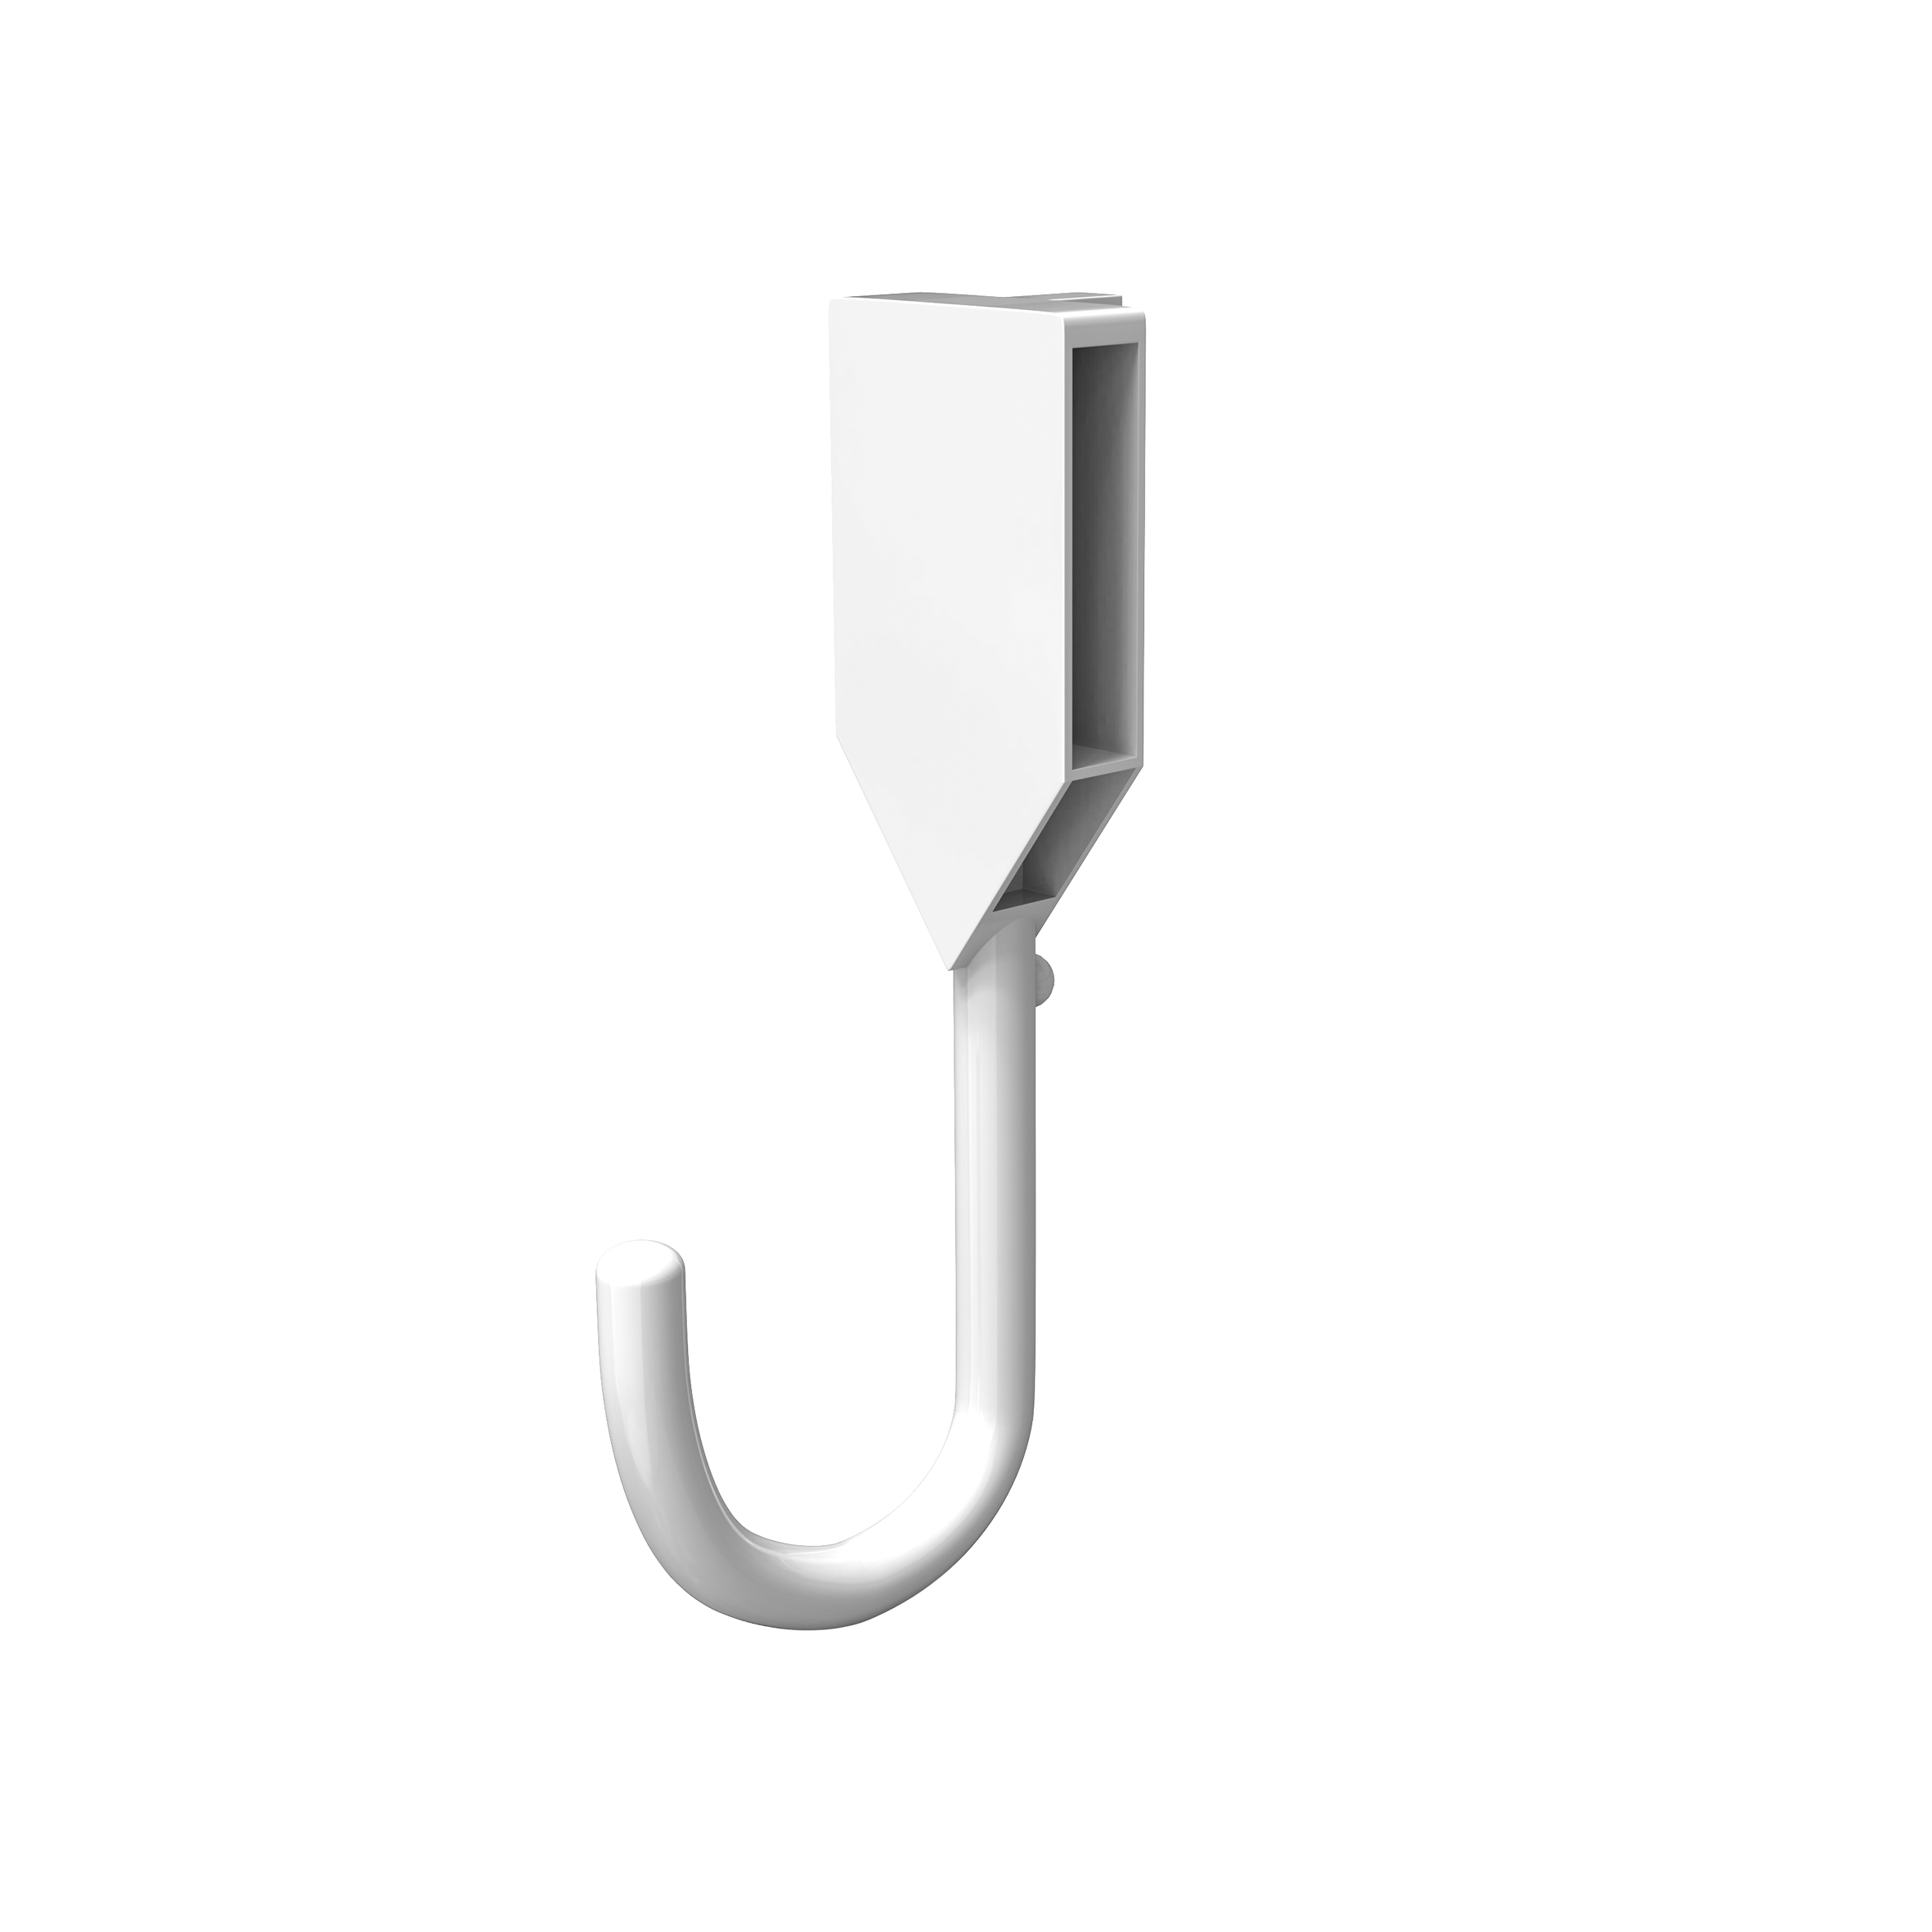 J-type Small Hook for Pegboard - 5 pieces